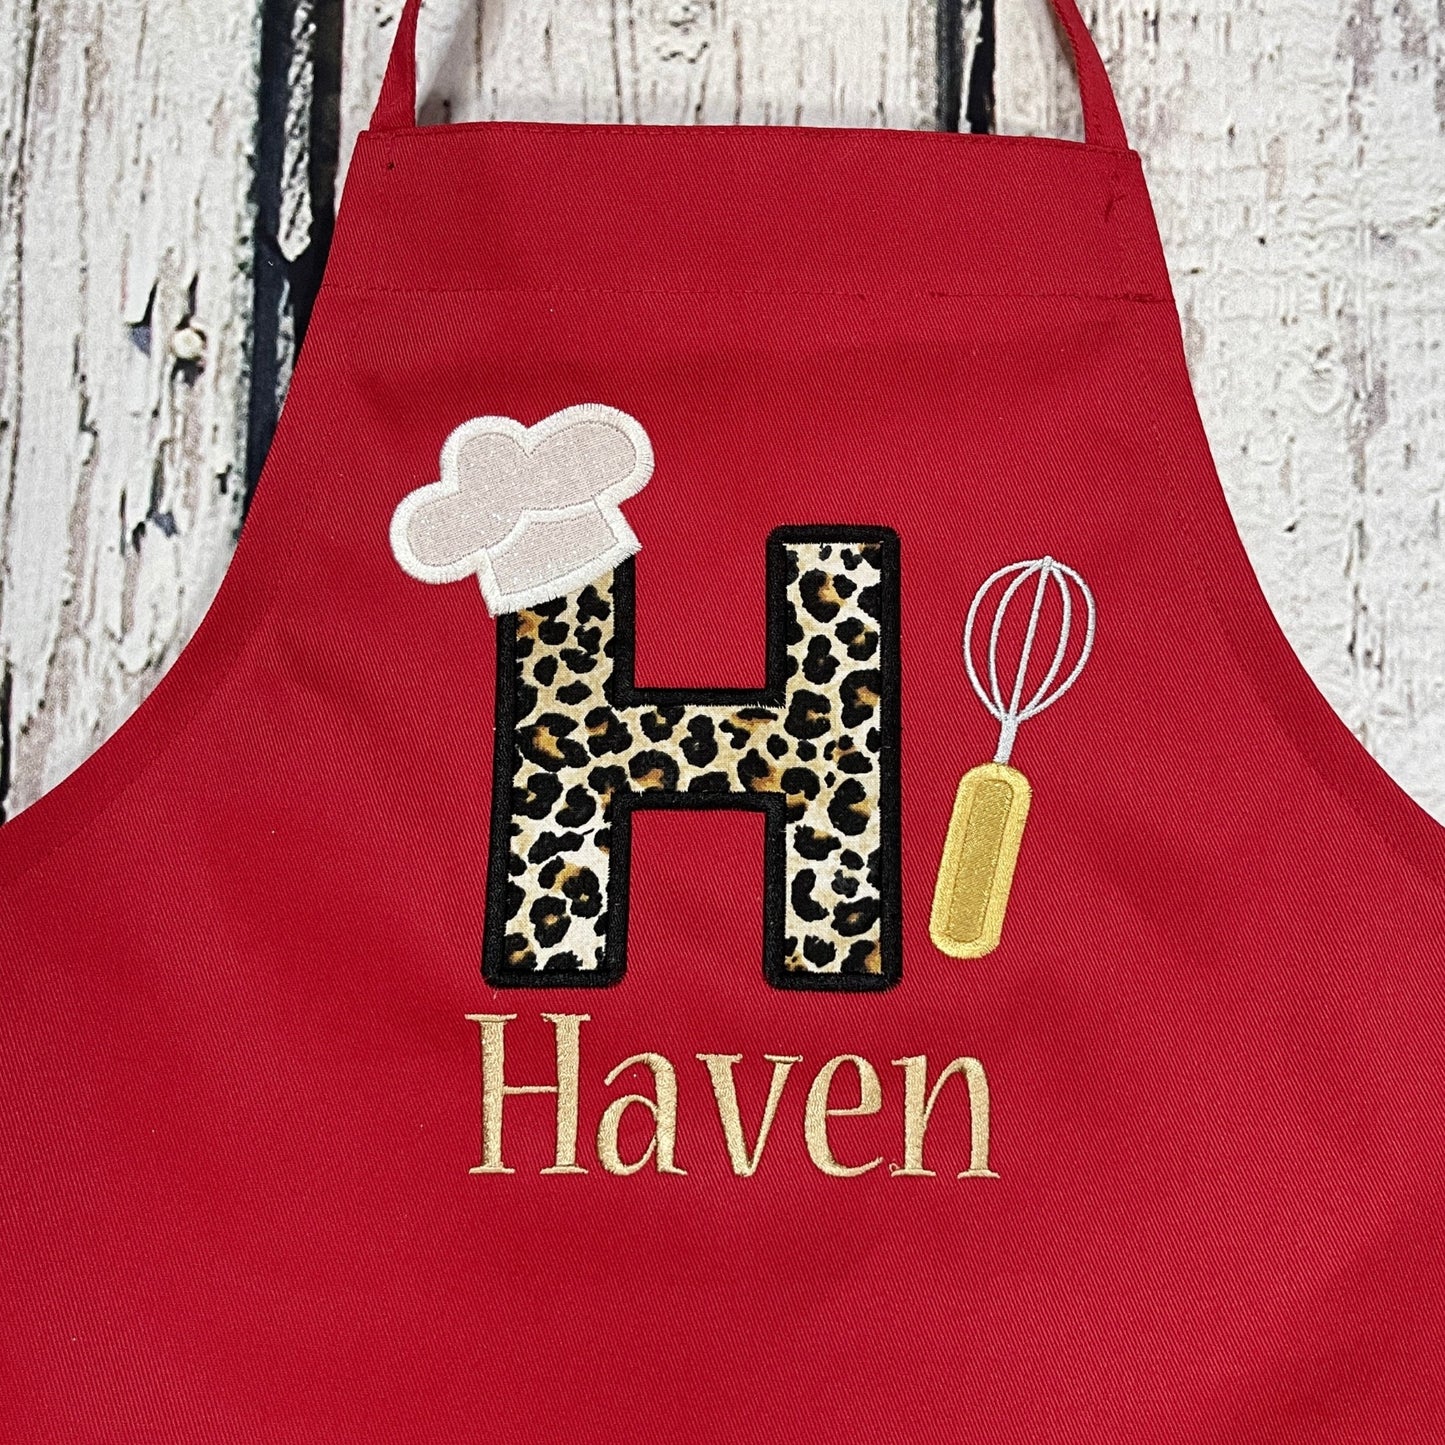 Girls Personalized Embroidered Apron with Animal Print Large initial & name